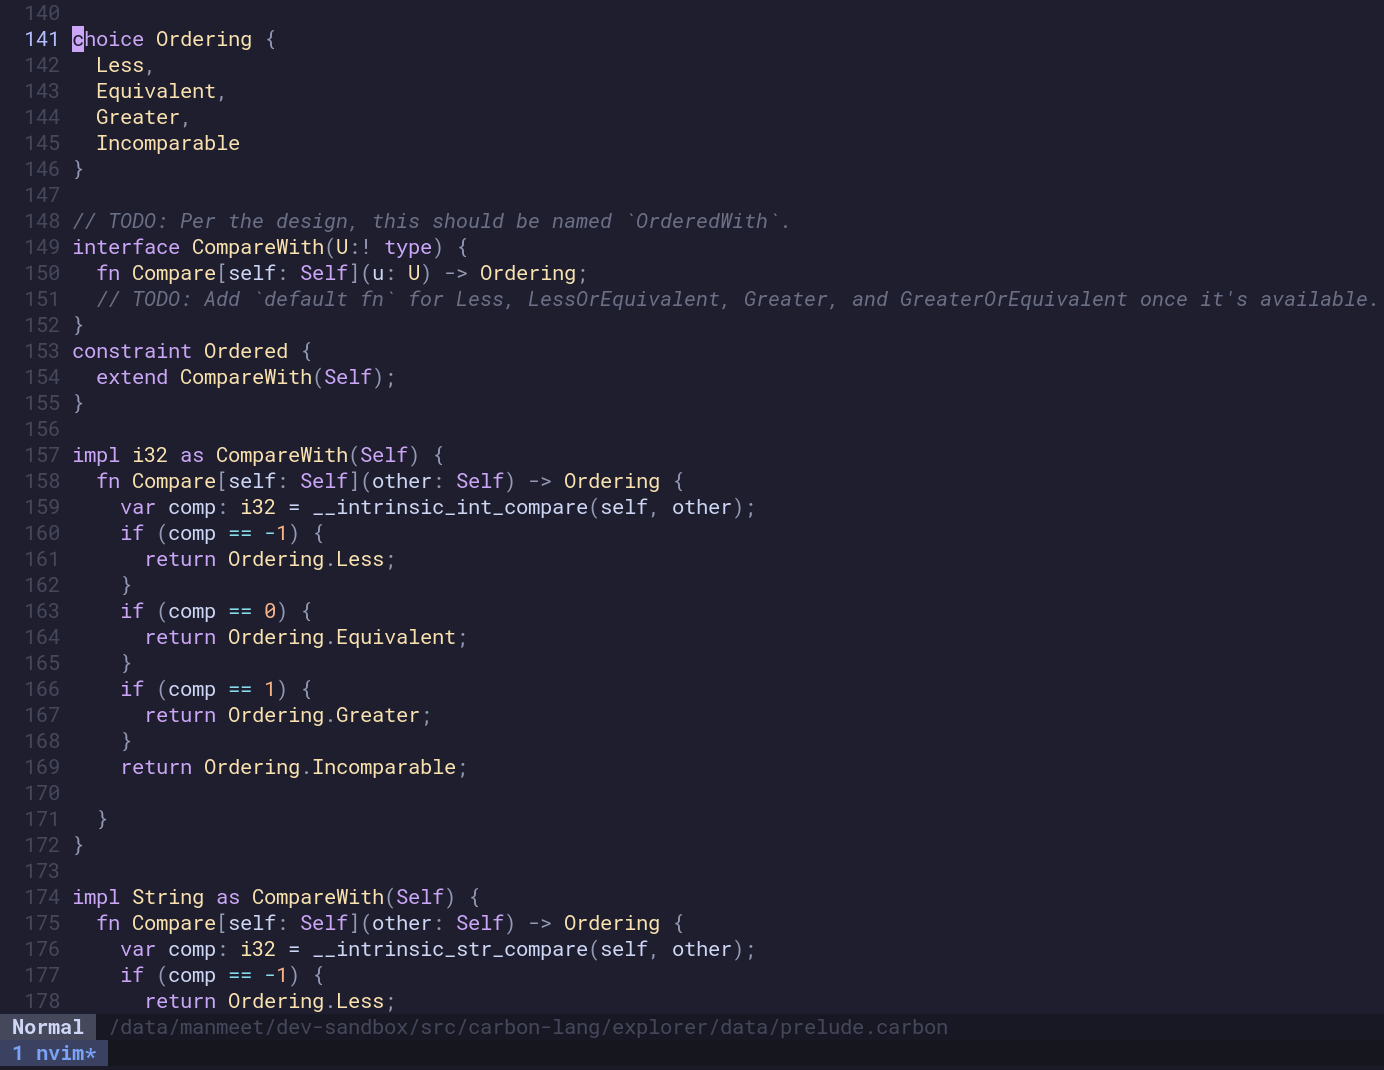 Carbon code syntax highlighting in Vim